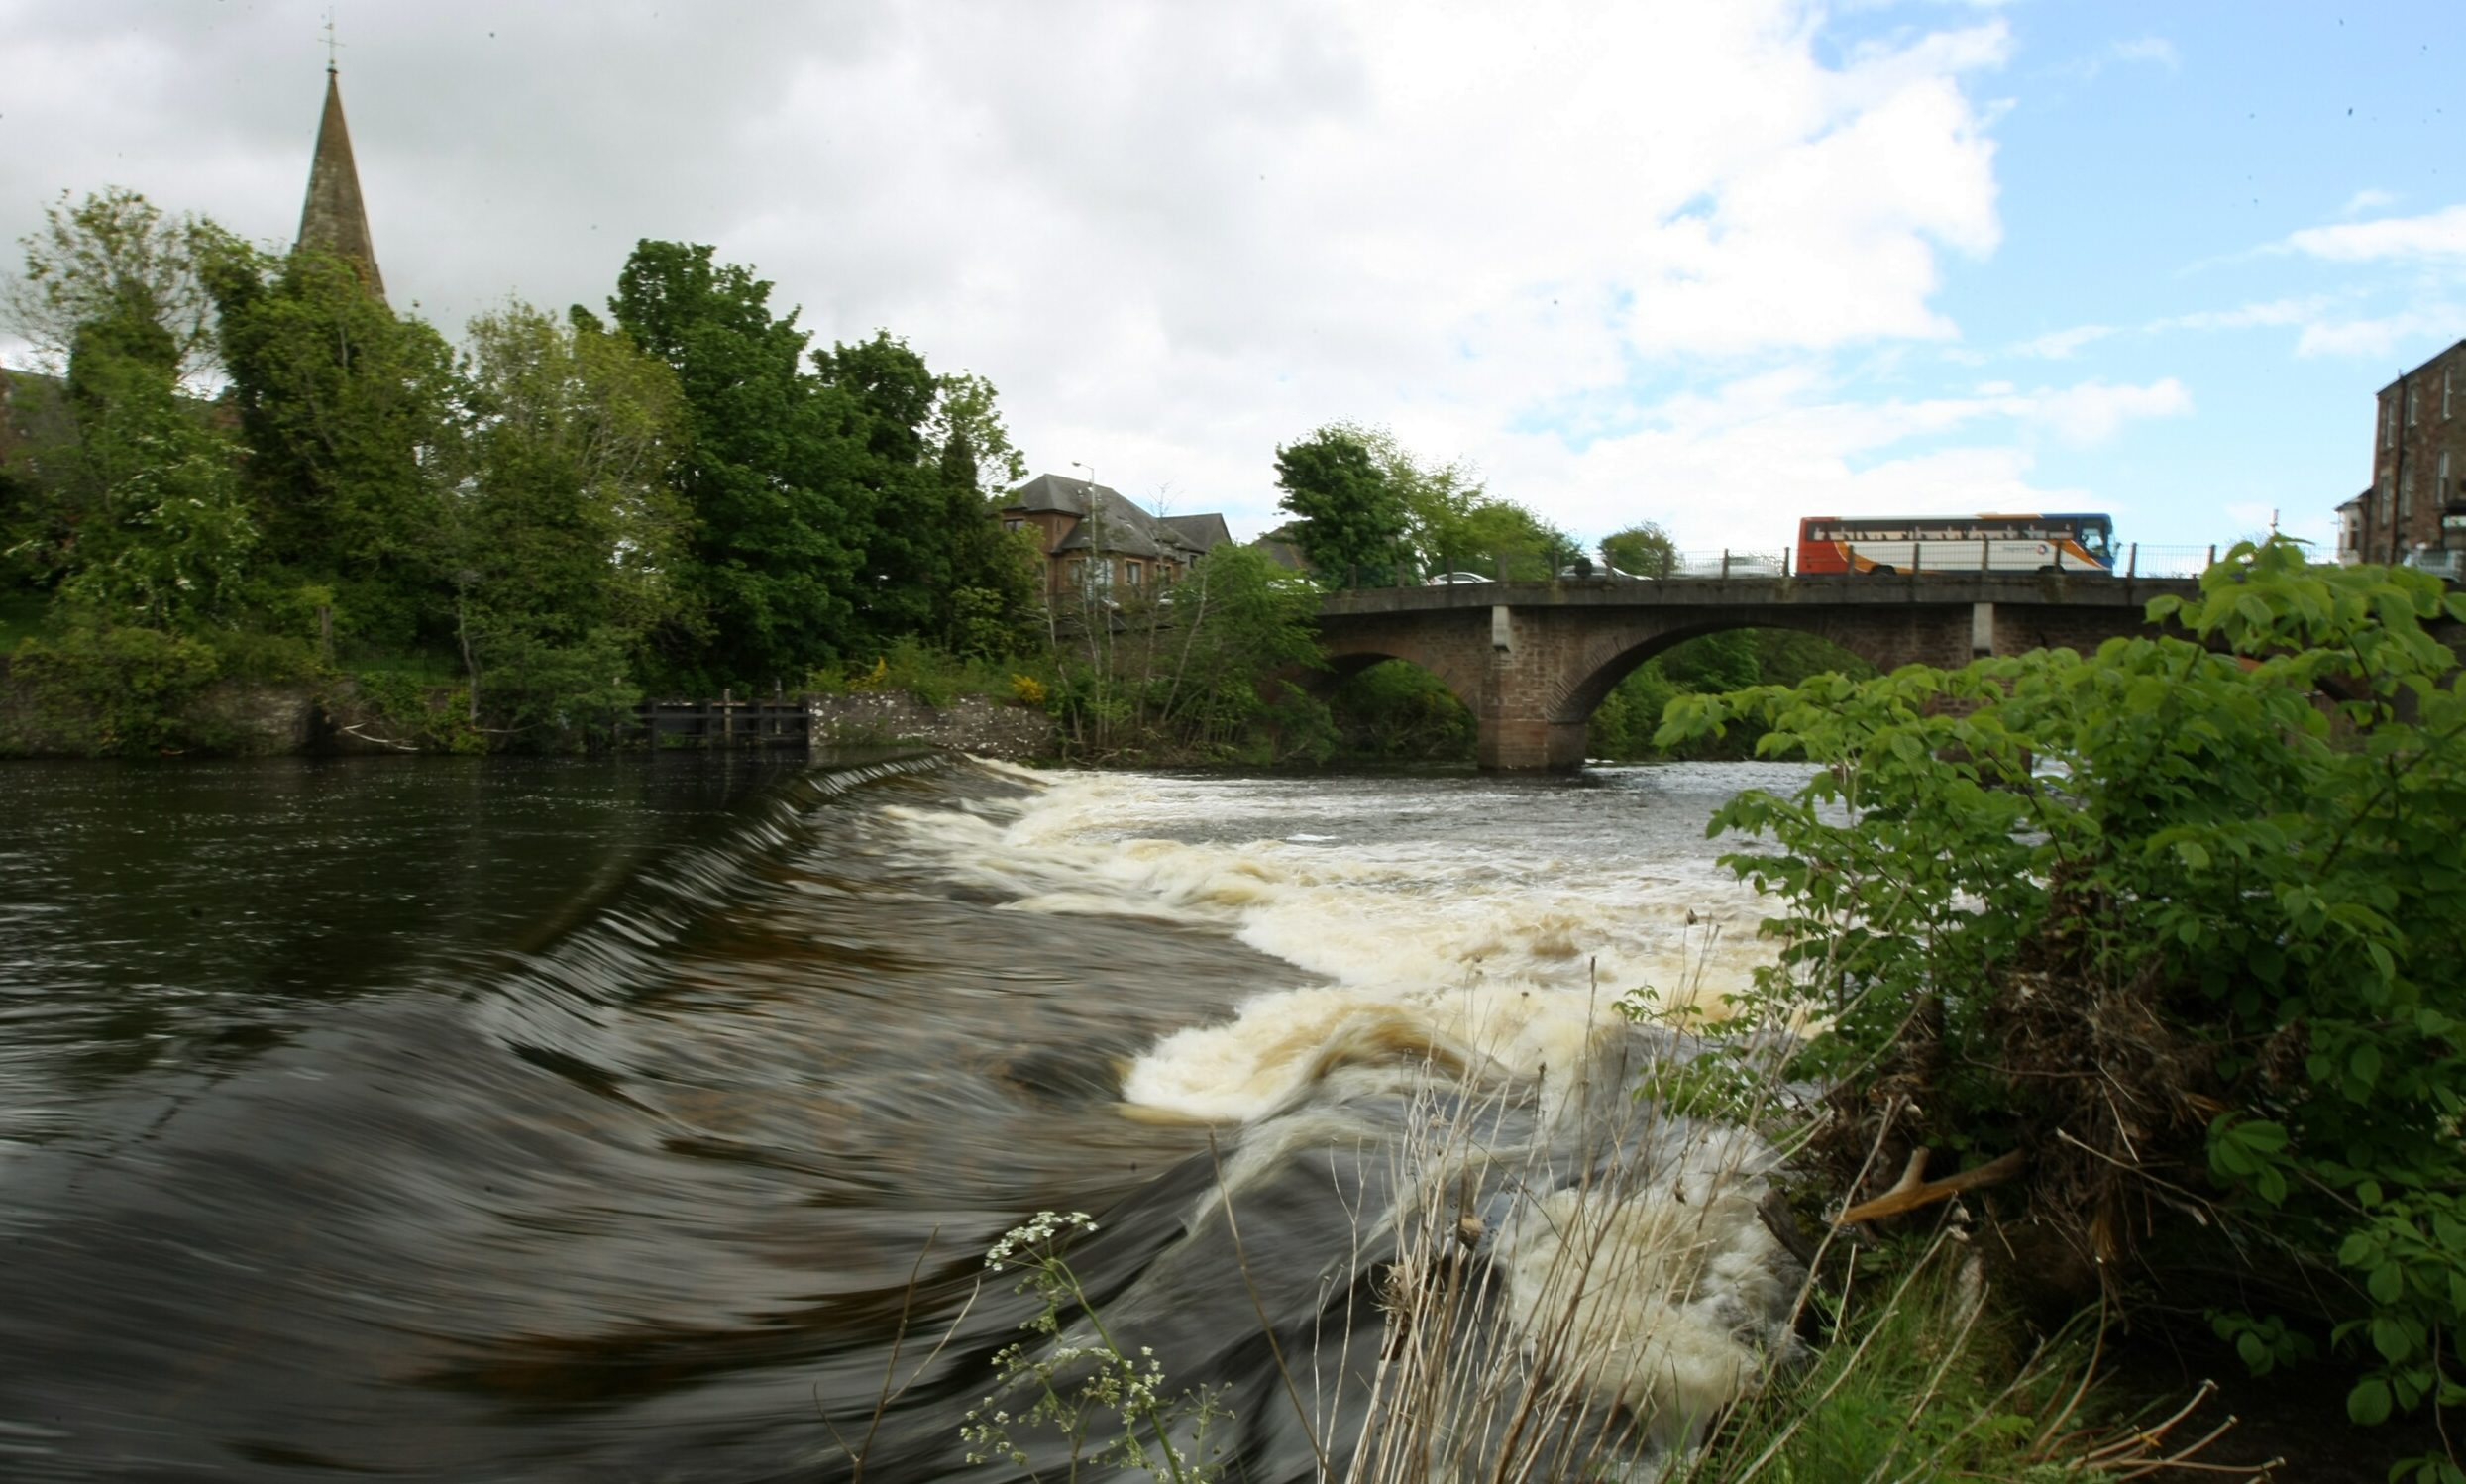 Poles were recovered from the River Ericht at Blairgowrie.